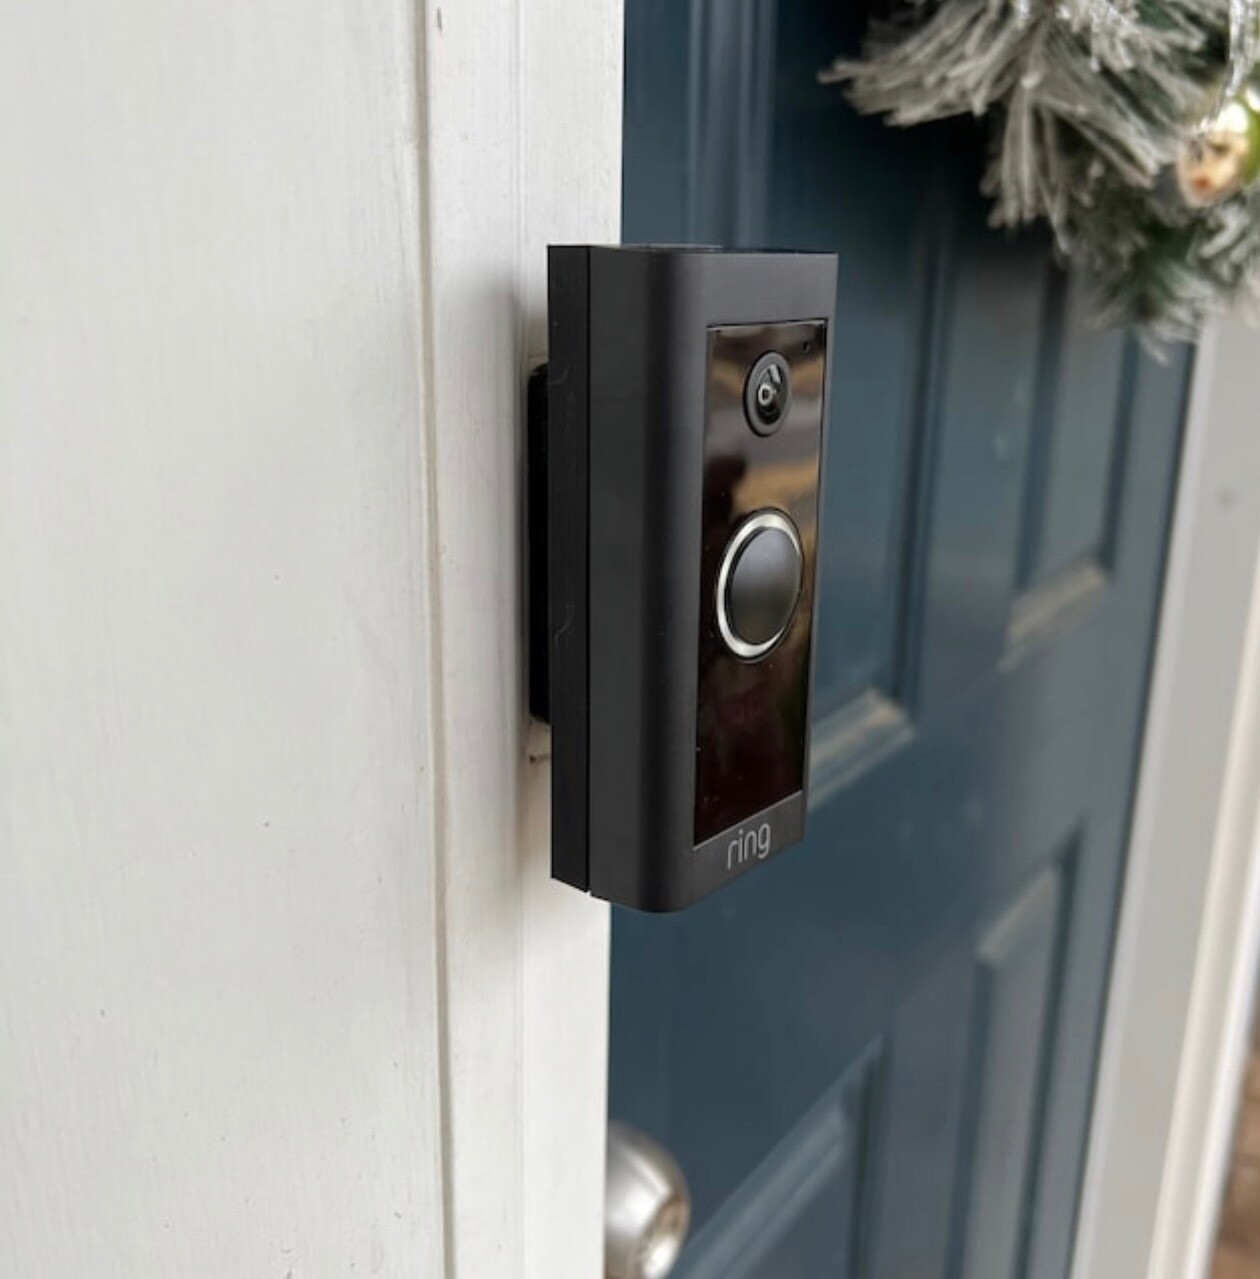 Ring 3 Doorbell Fixed Mount Slim INSTALL ANYWHERE Siding/ Trim- Fits exactly where old doorbell fit.- Angle Adjustment Available NO NEW HOLES